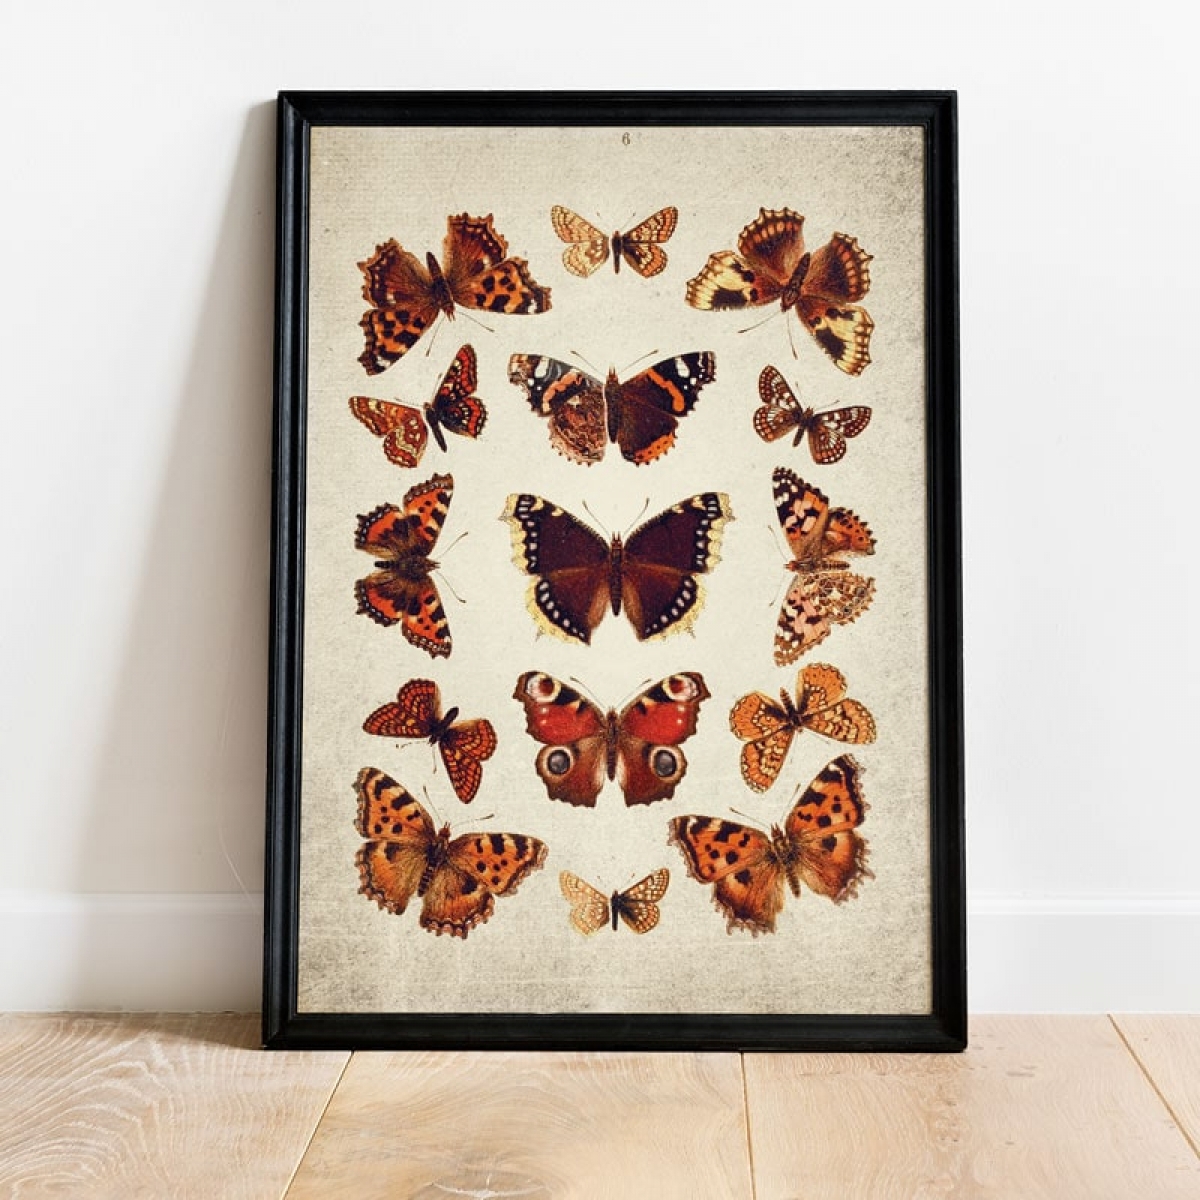 Vintage Entomology Giclee Print (British Butterflies Plate From 1837)